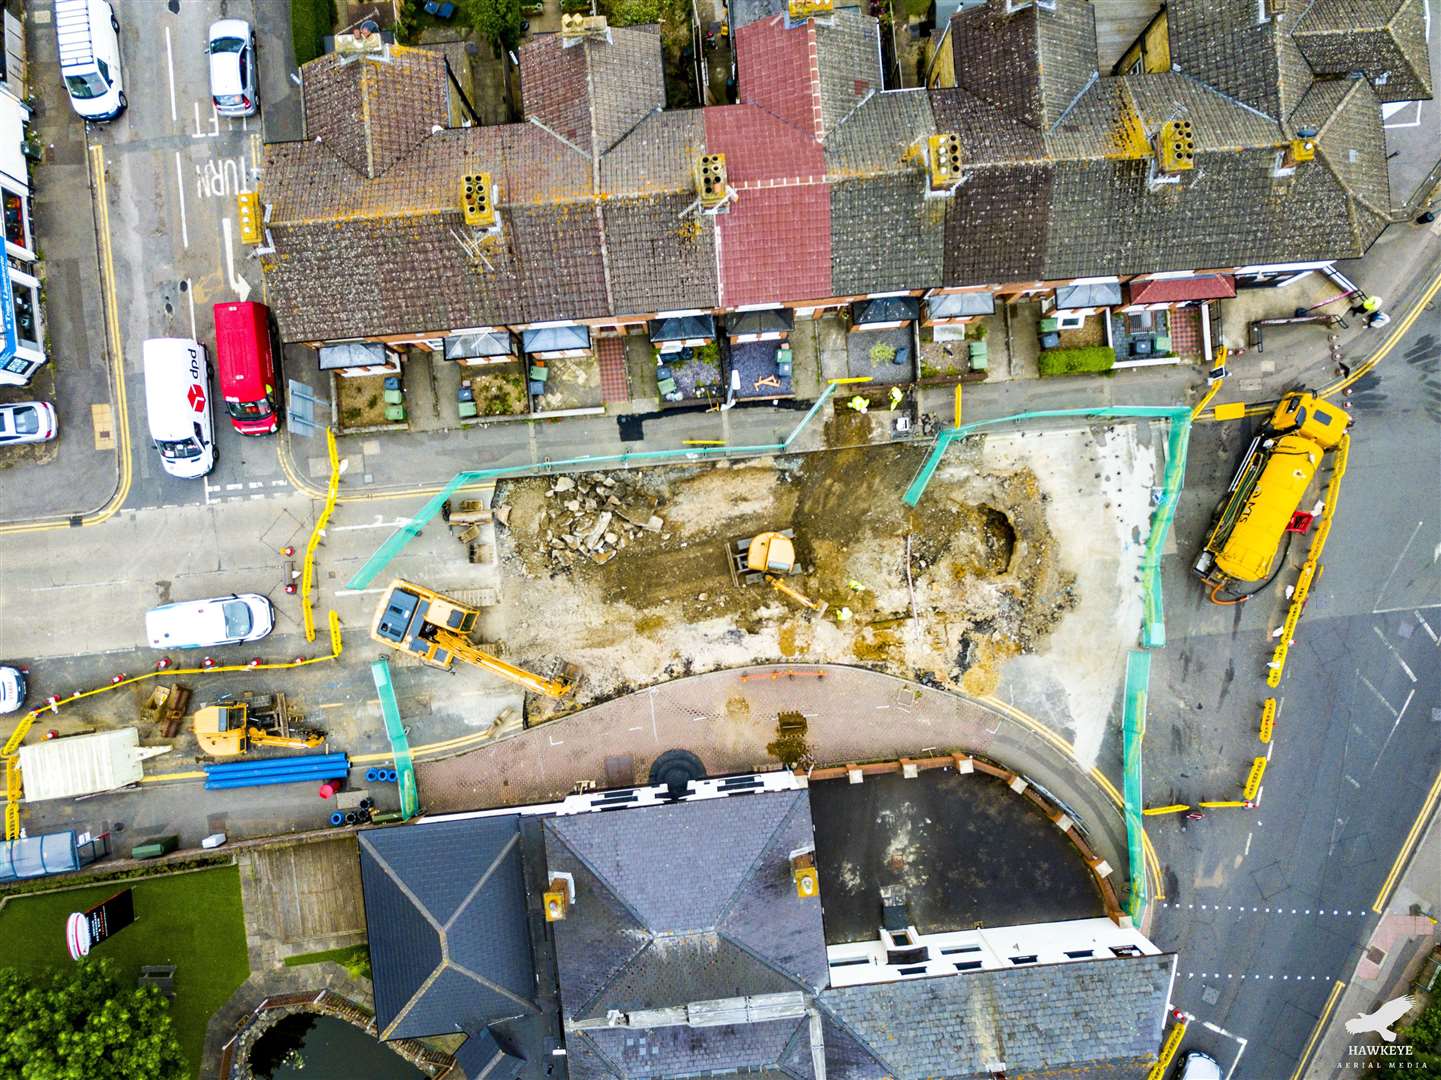 Amazing drone photo shows the extent of the excavation. Image: HawkEye Aerial Media Ltd